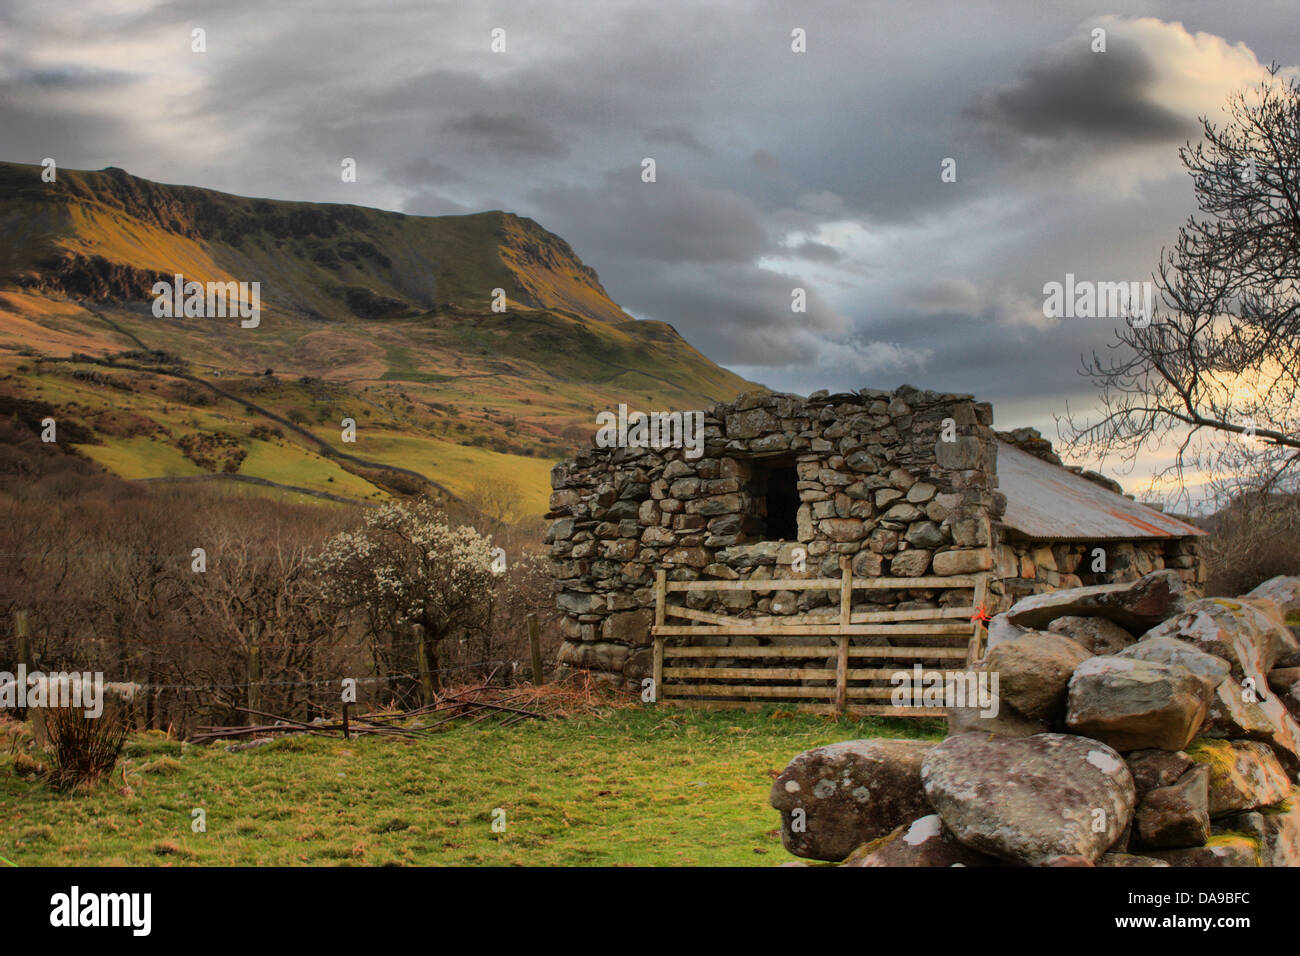 Stone building in front of the majestic Cadair Idris Mountain Range under  a cloudy sky Stock Photo